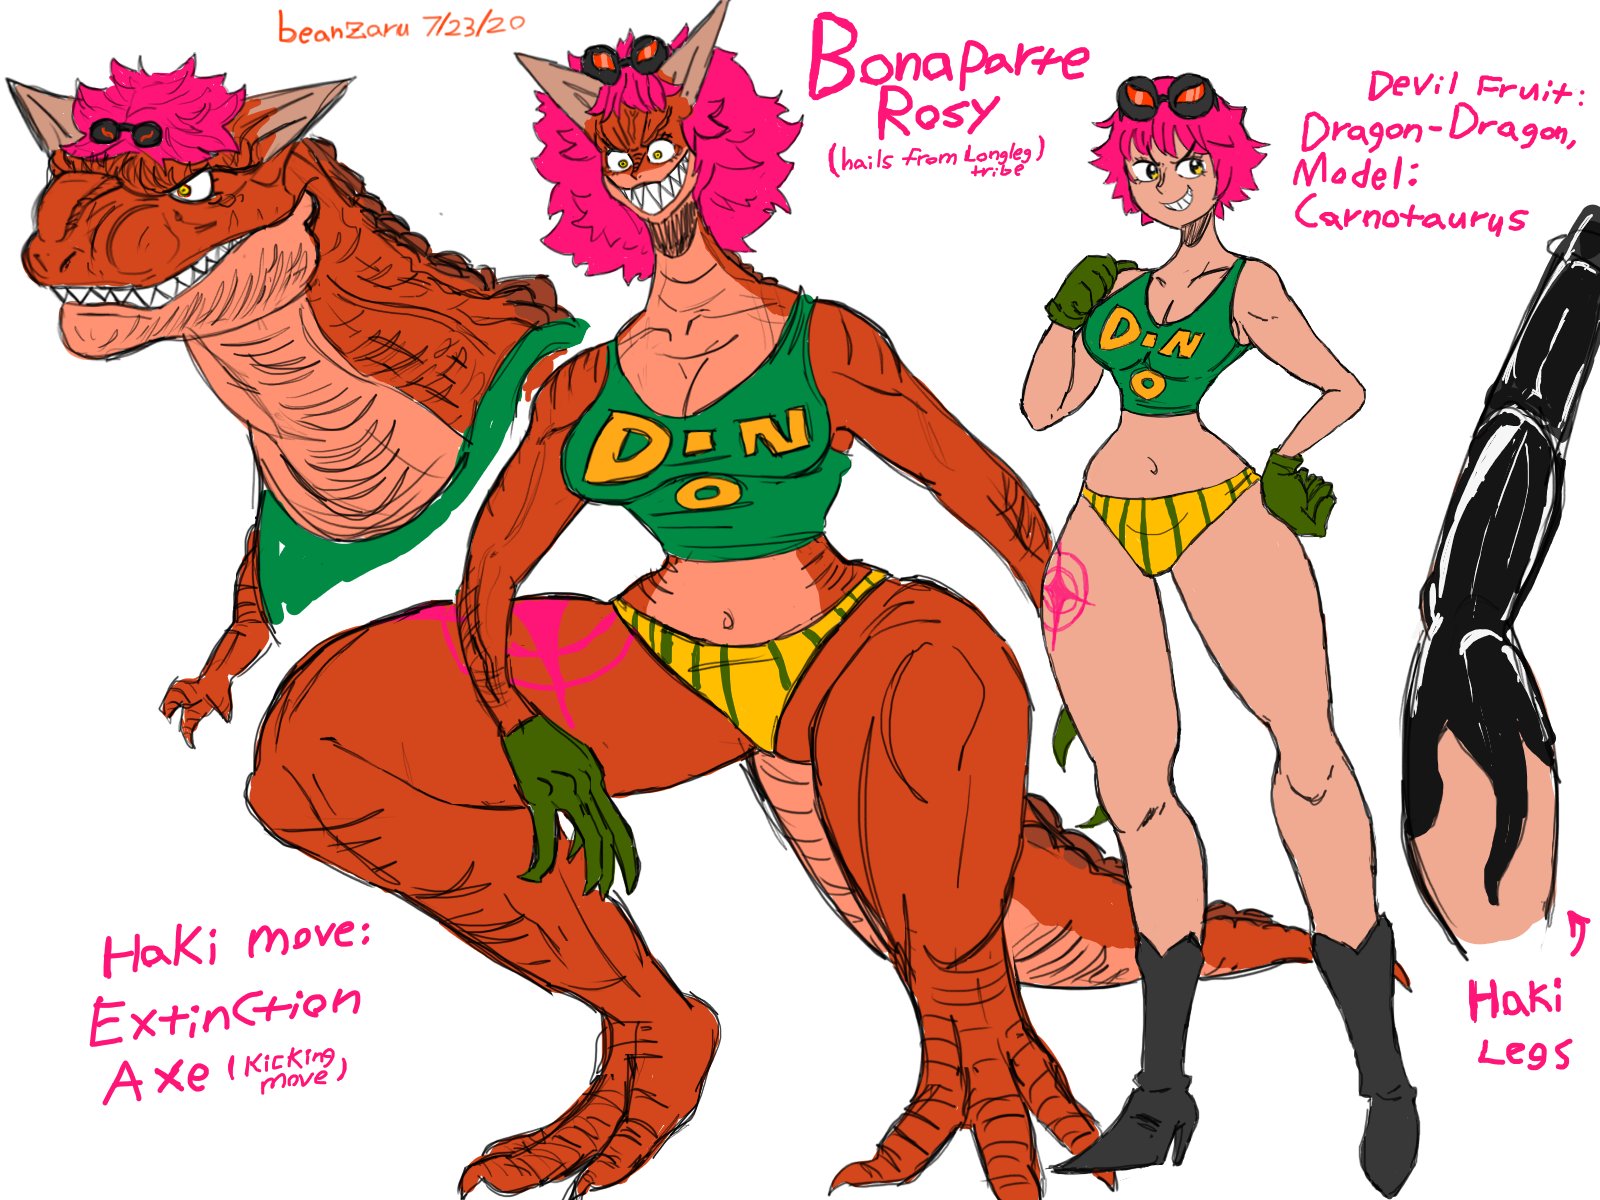 Beans Made Thighs Finished Bonaparte Rosy A Devil Fruit User From The Longleg Tribe Just In Her Basic Form She S 4 25 Meters She Can Use Armament And Observation Haki During